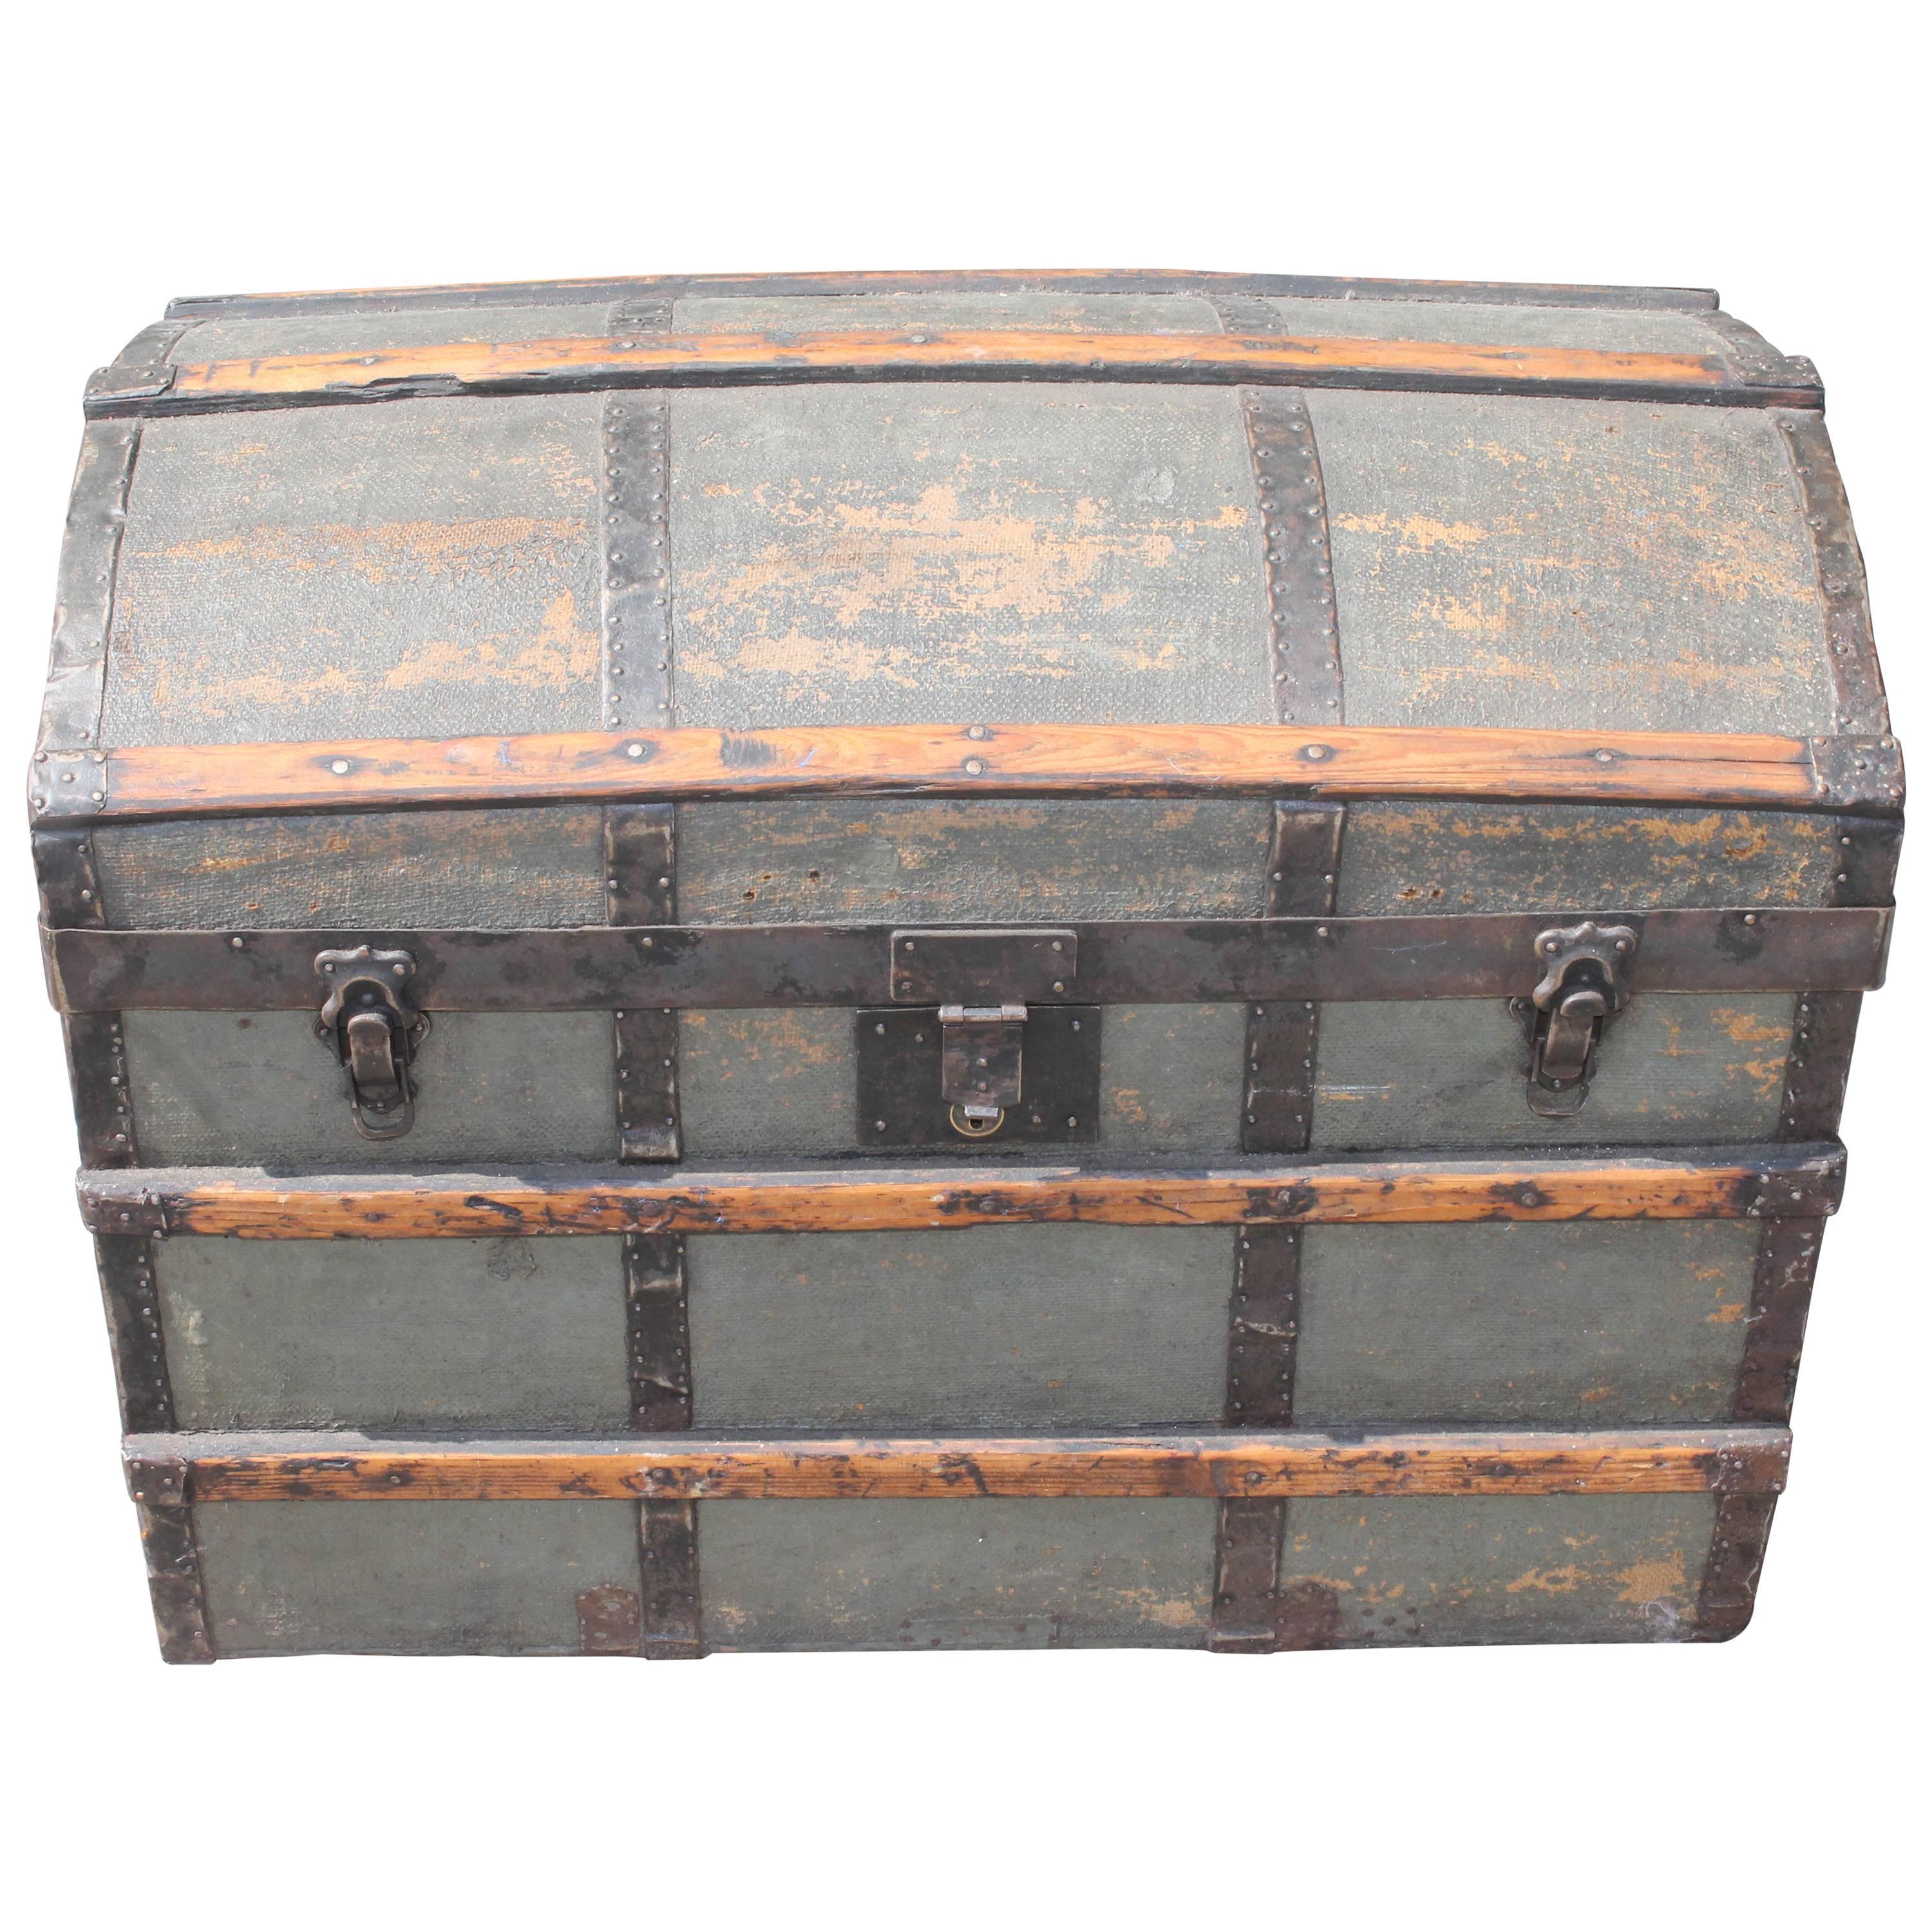 19th Century Original Green Painted Dome Top Trunk